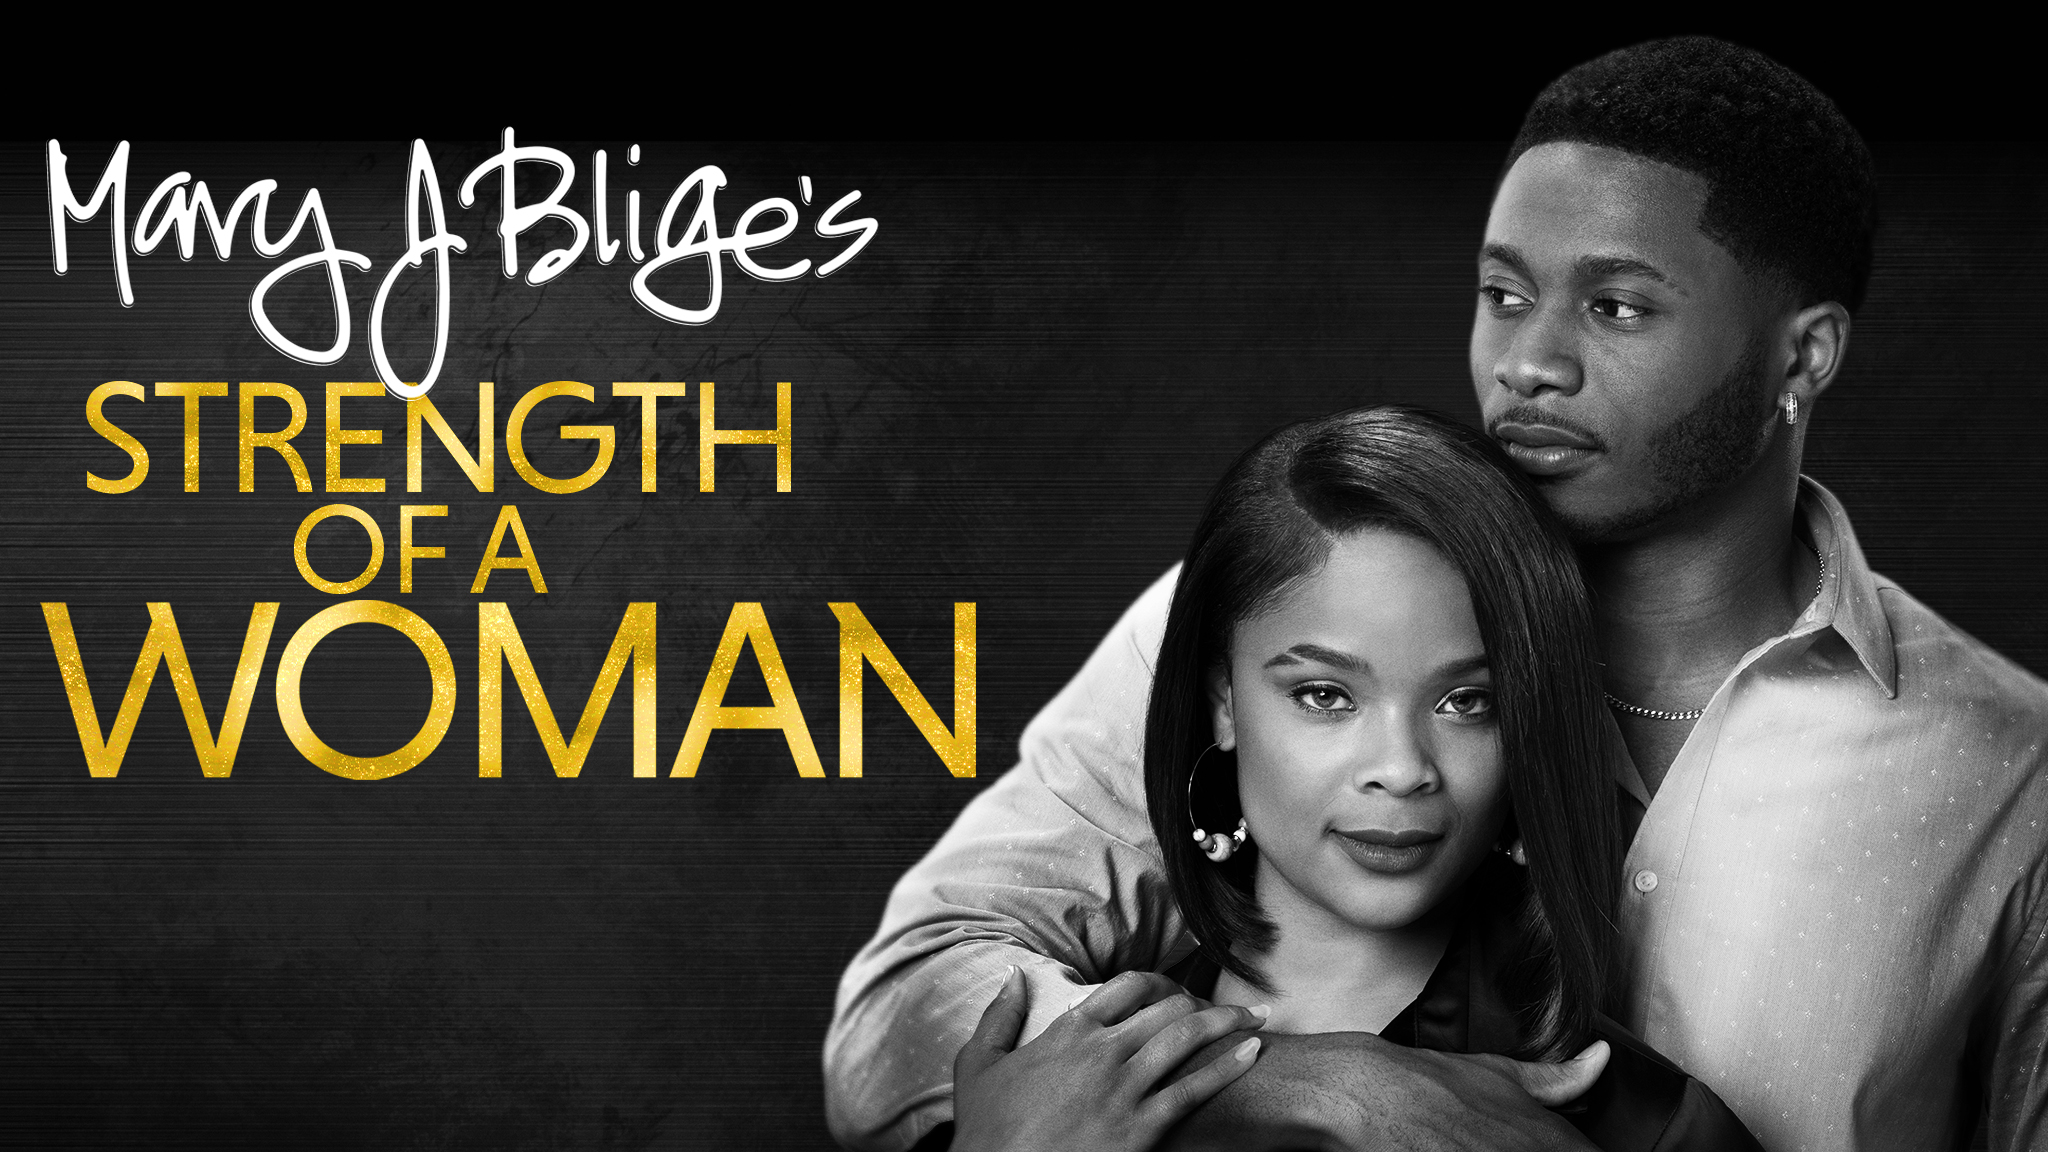 Mary J. Blige's Strength of a Woman